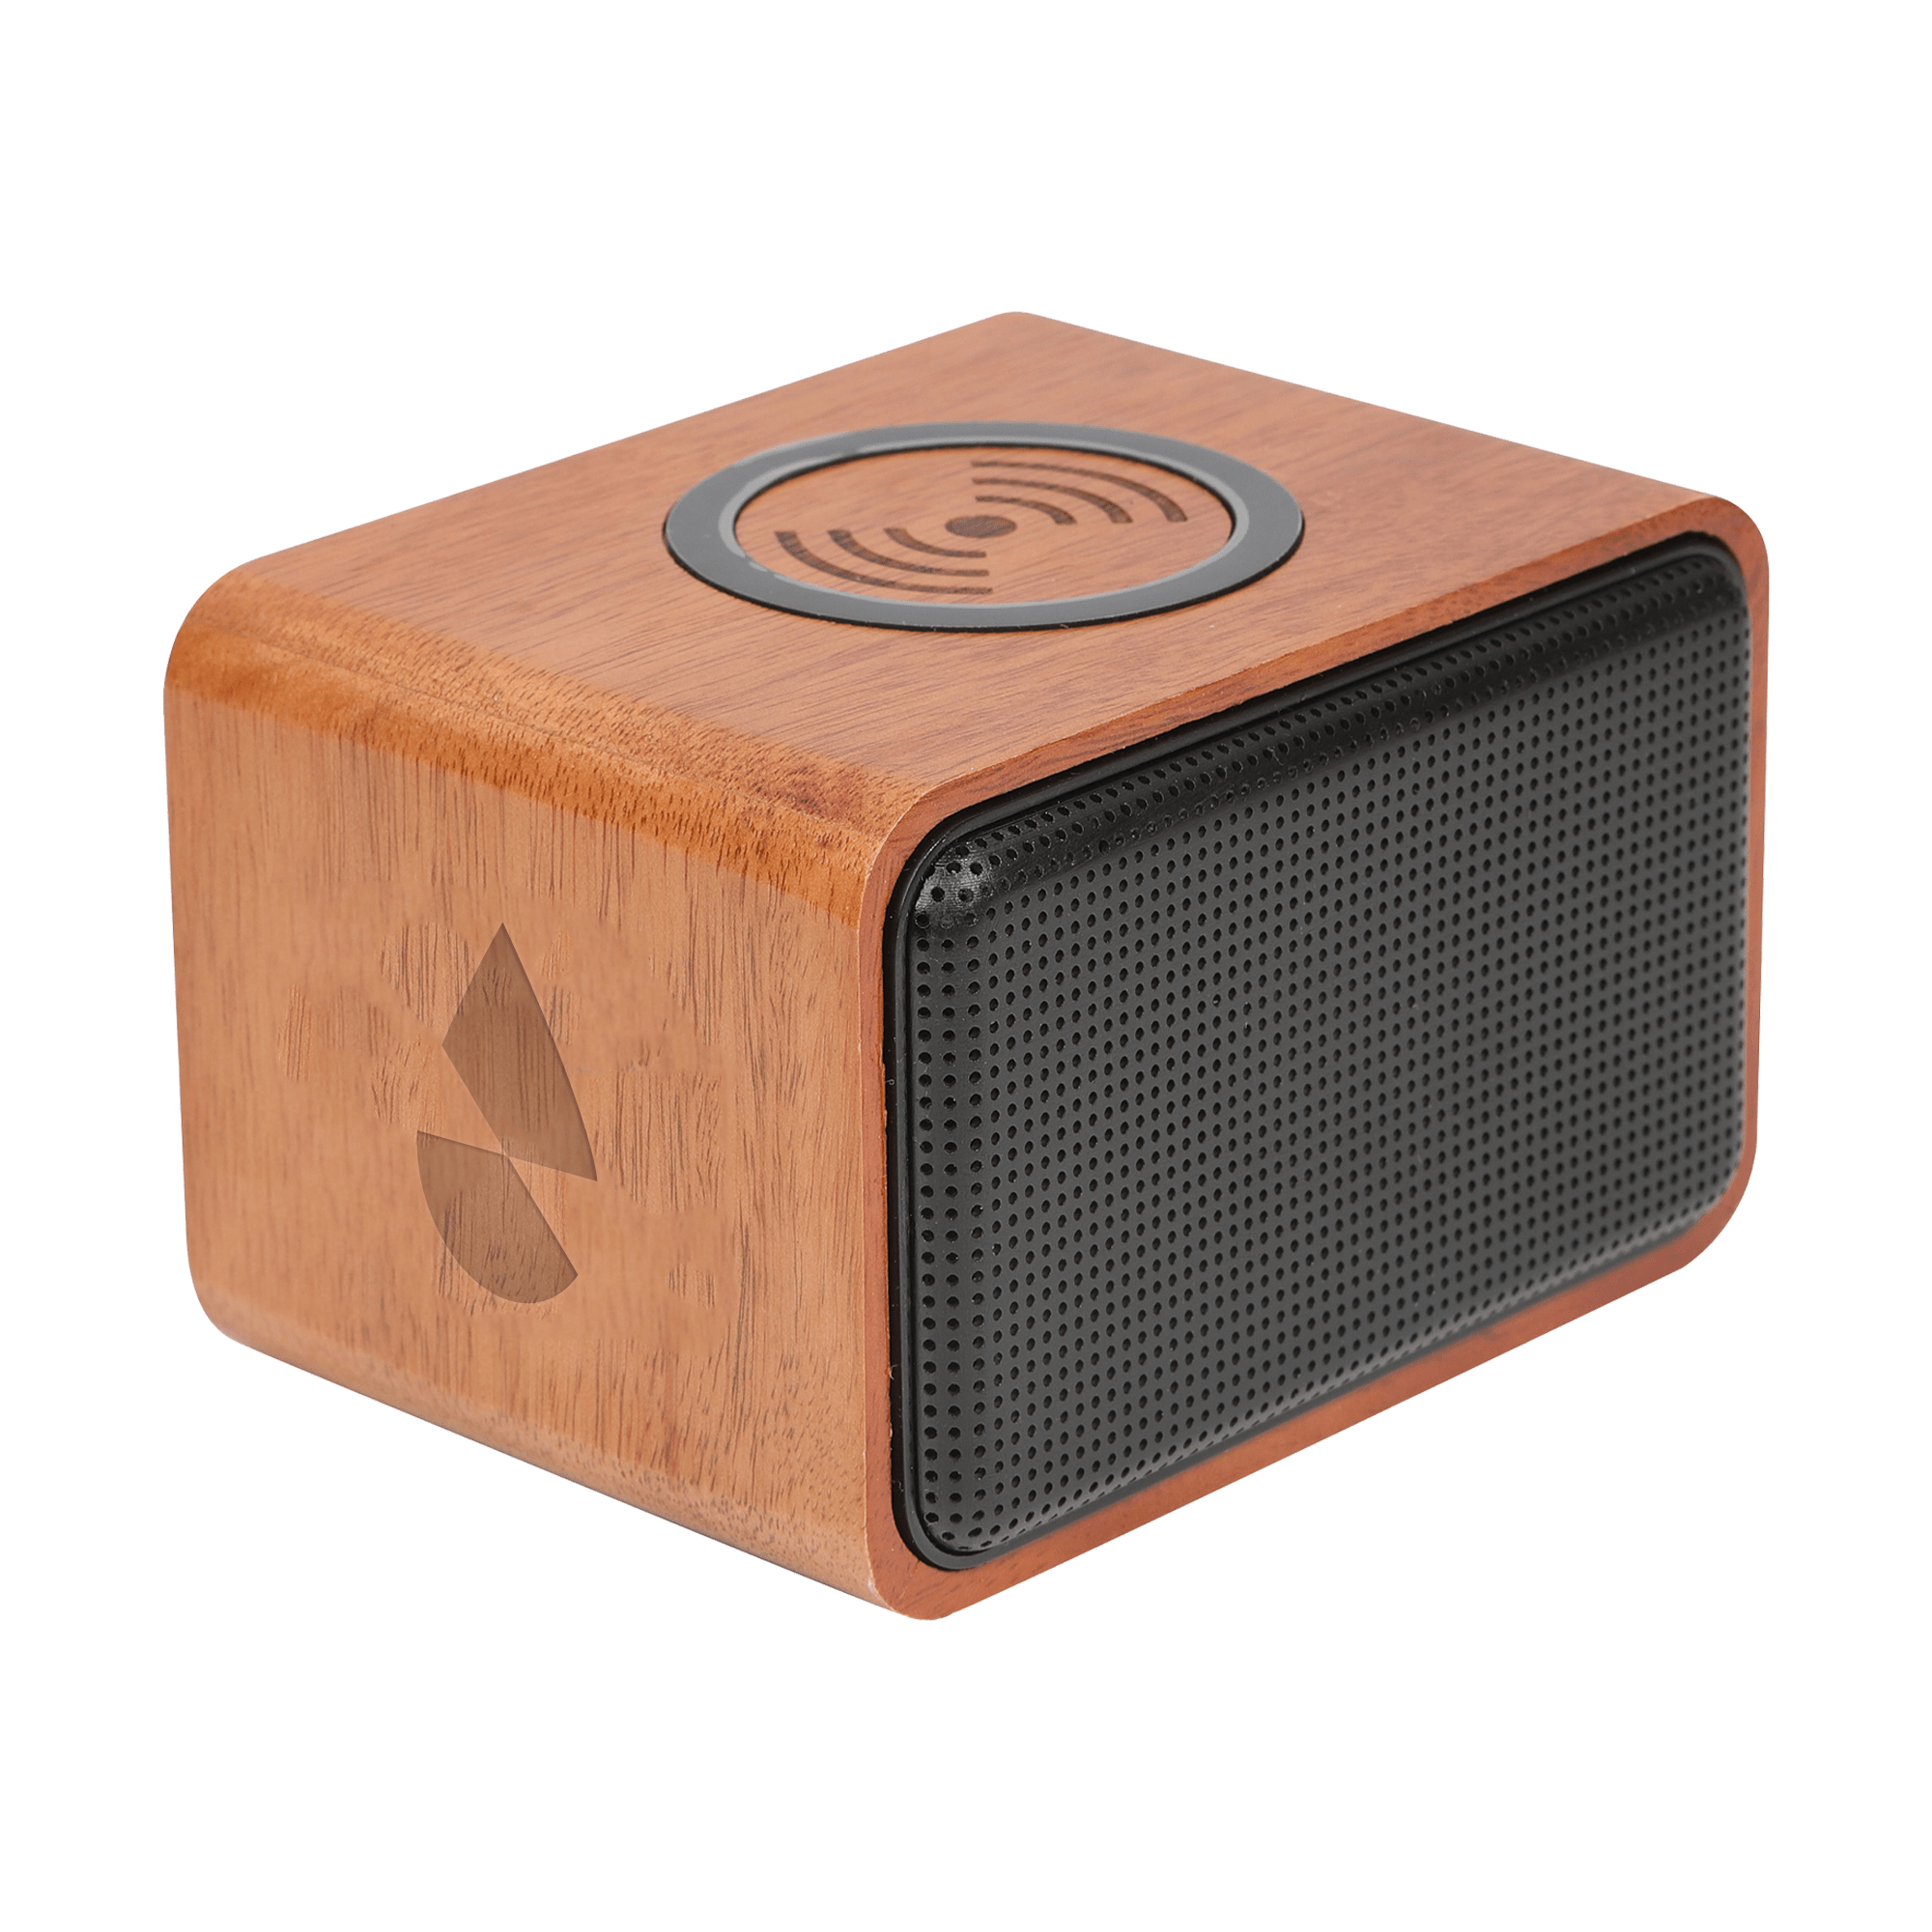 wooden bluetooth speaker, among the classier corporate gifts